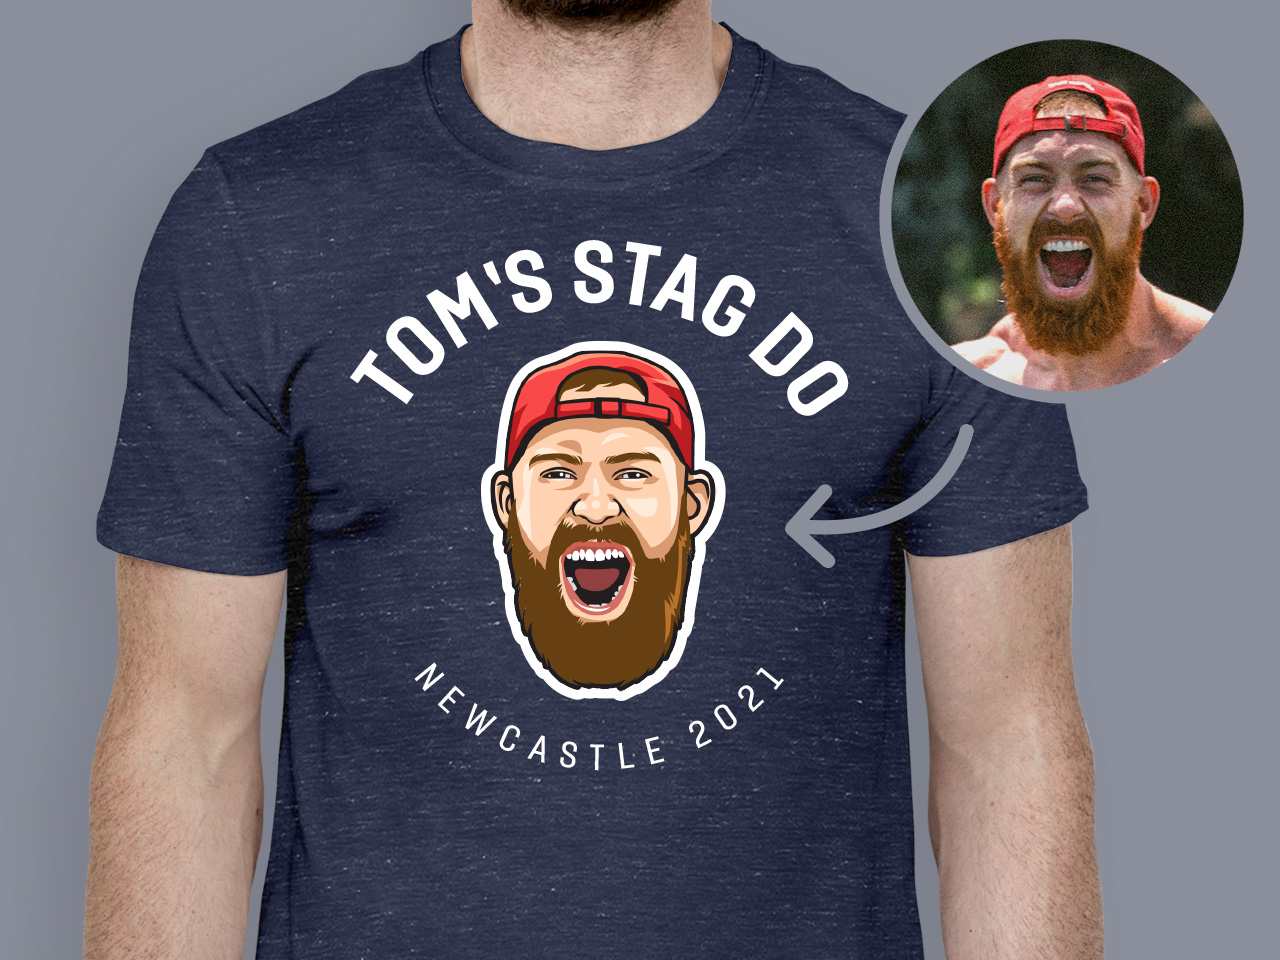 Stag t-shirt sales are up 500% since the UK's reopening